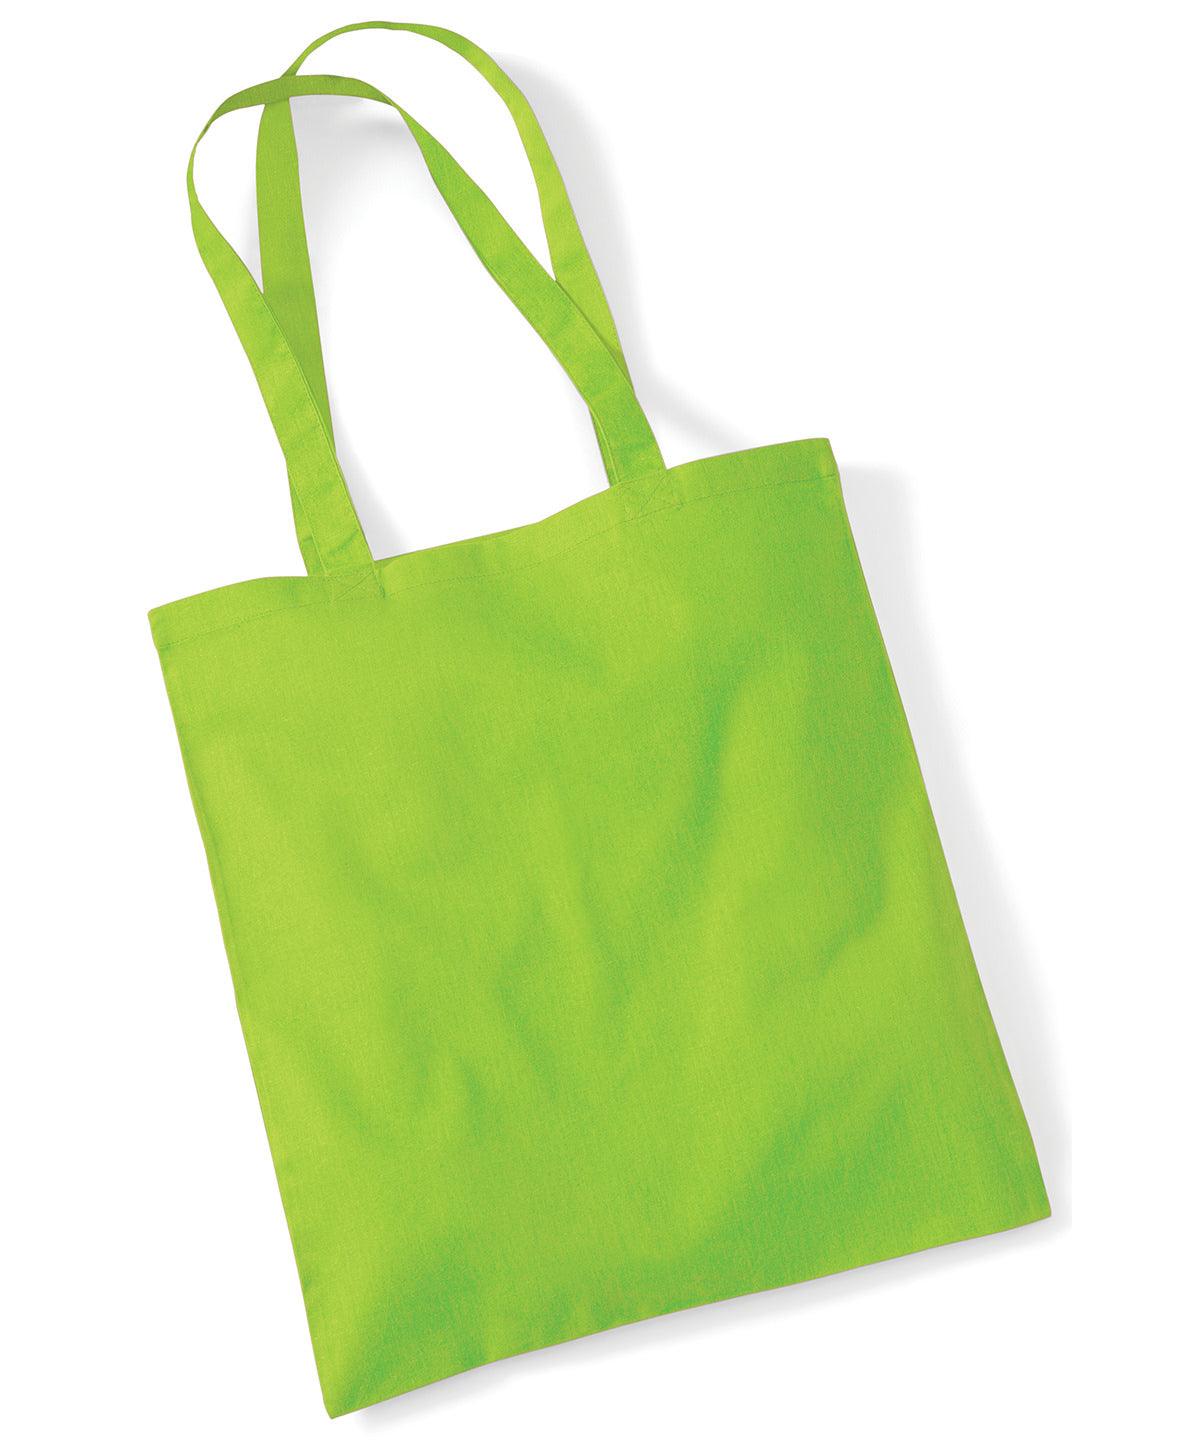 Lime Green - Bag for life - long handles Bags Westford Mill Bags & Luggage, Crafting, Must Haves, Rebrandable Schoolwear Centres